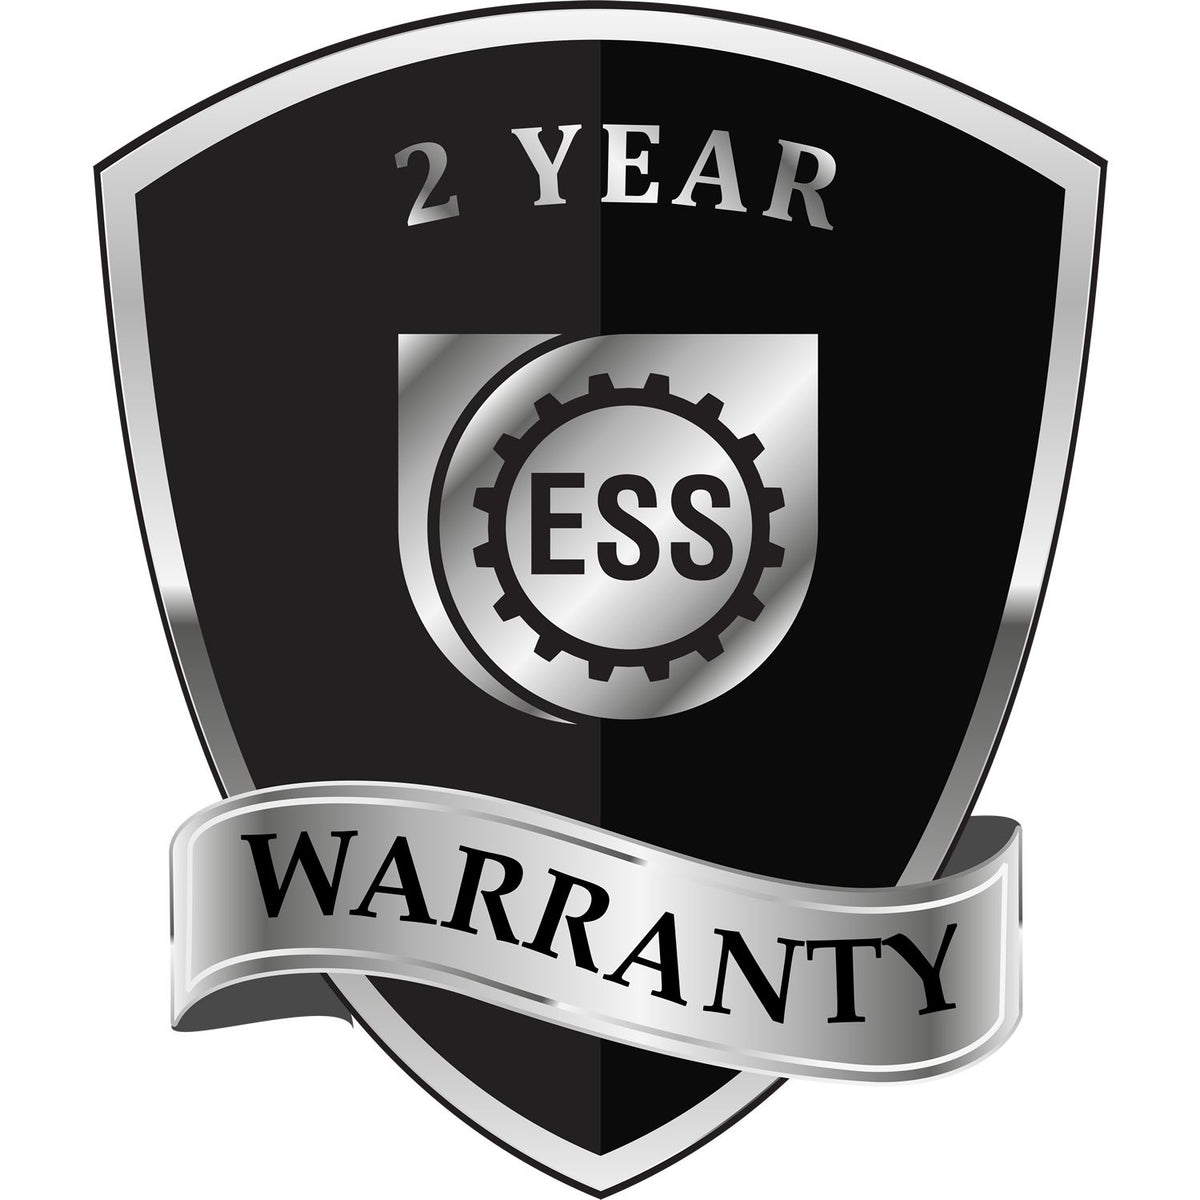 A badge or emblem showing a warranty icon for the State of District of Columbia Extended Long Reach Engineer Seal